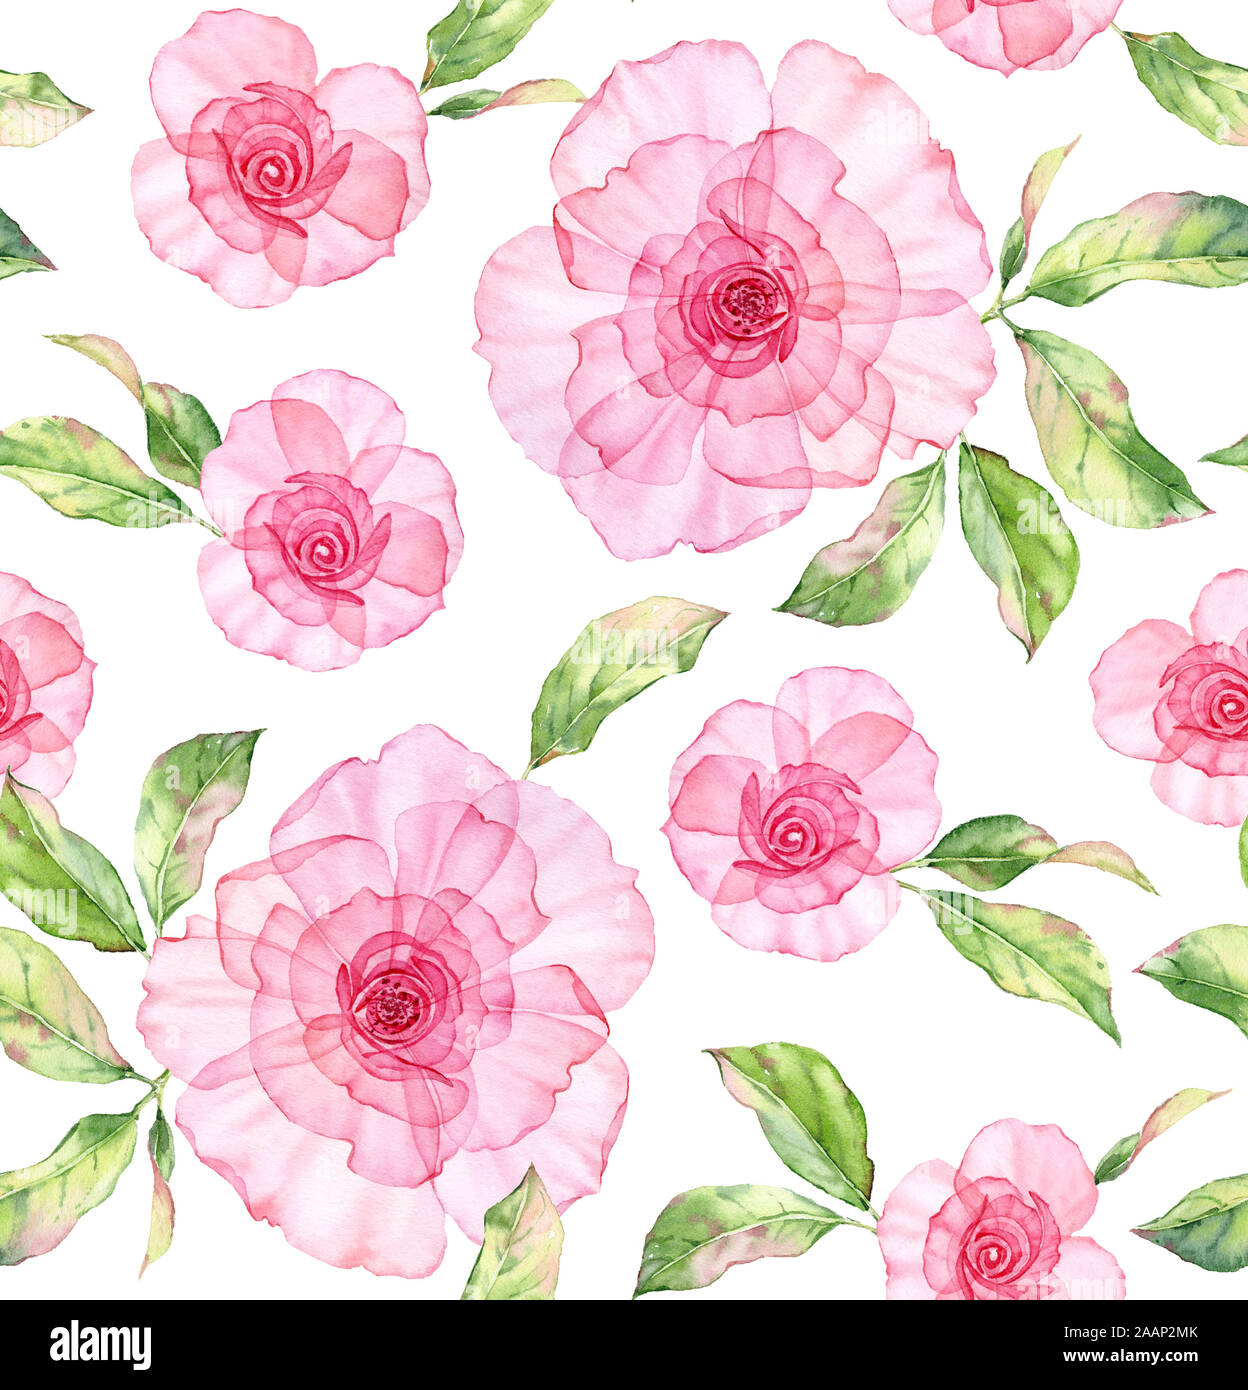 Transparent watercolor rose. Seamless floral pattern. Isolated hand drawn illustration with big detailed flowers and tender leaves for wallpaper Stock Photo